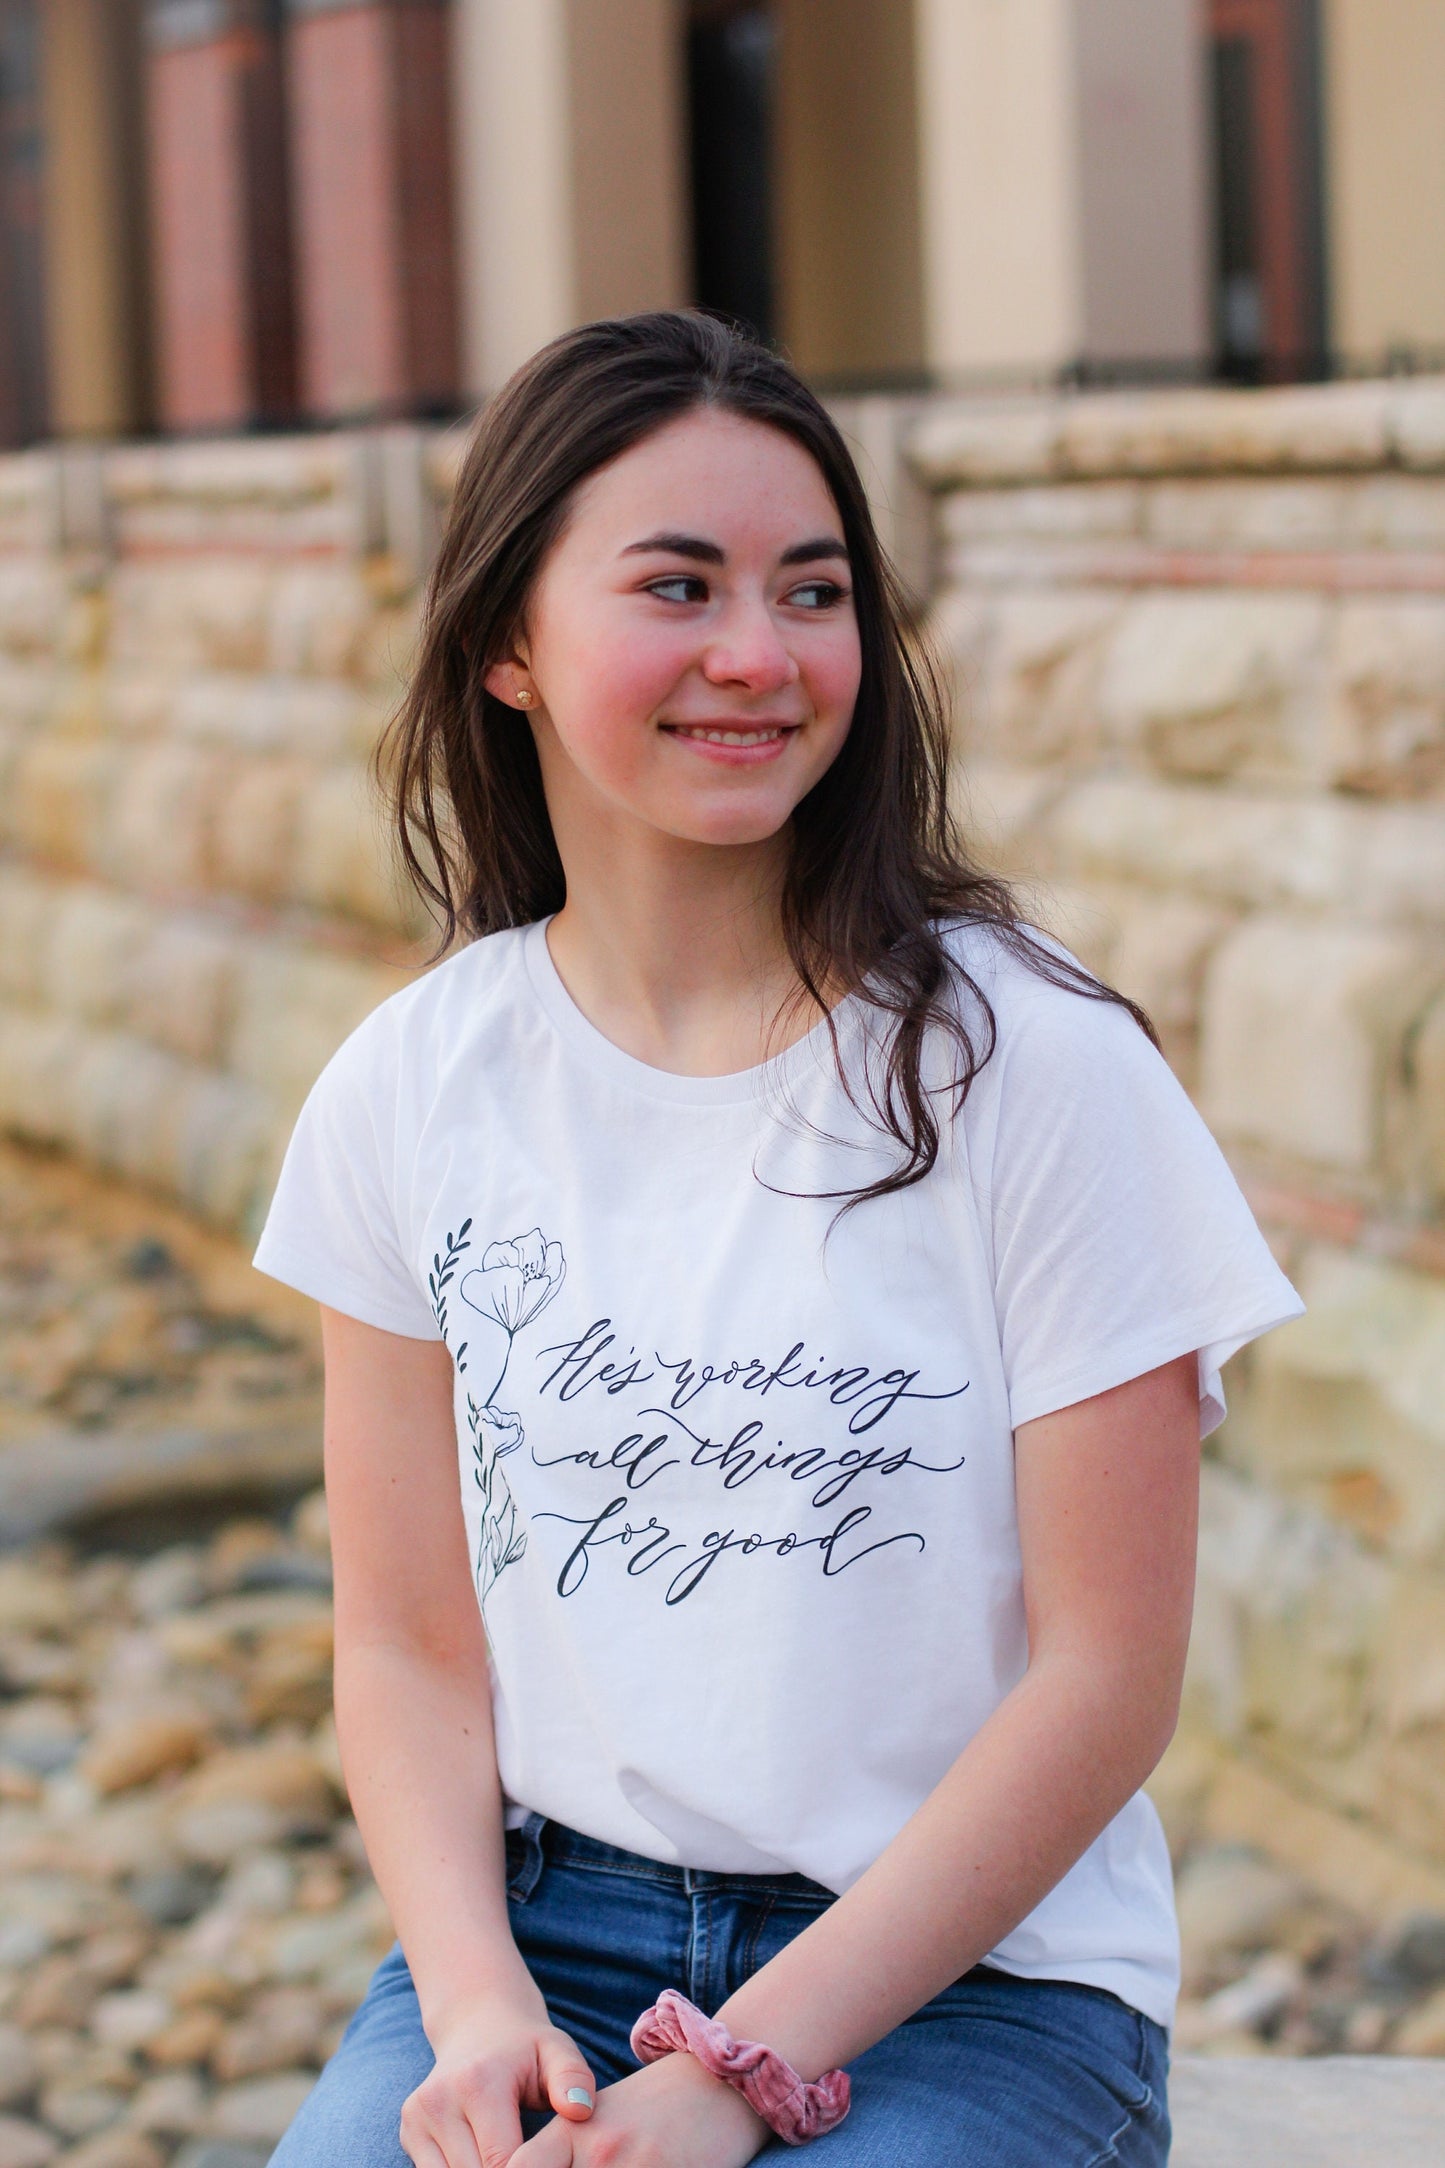 Elegant white tee, women's fit | "He's working all things for good" | Florals + hand lettering |